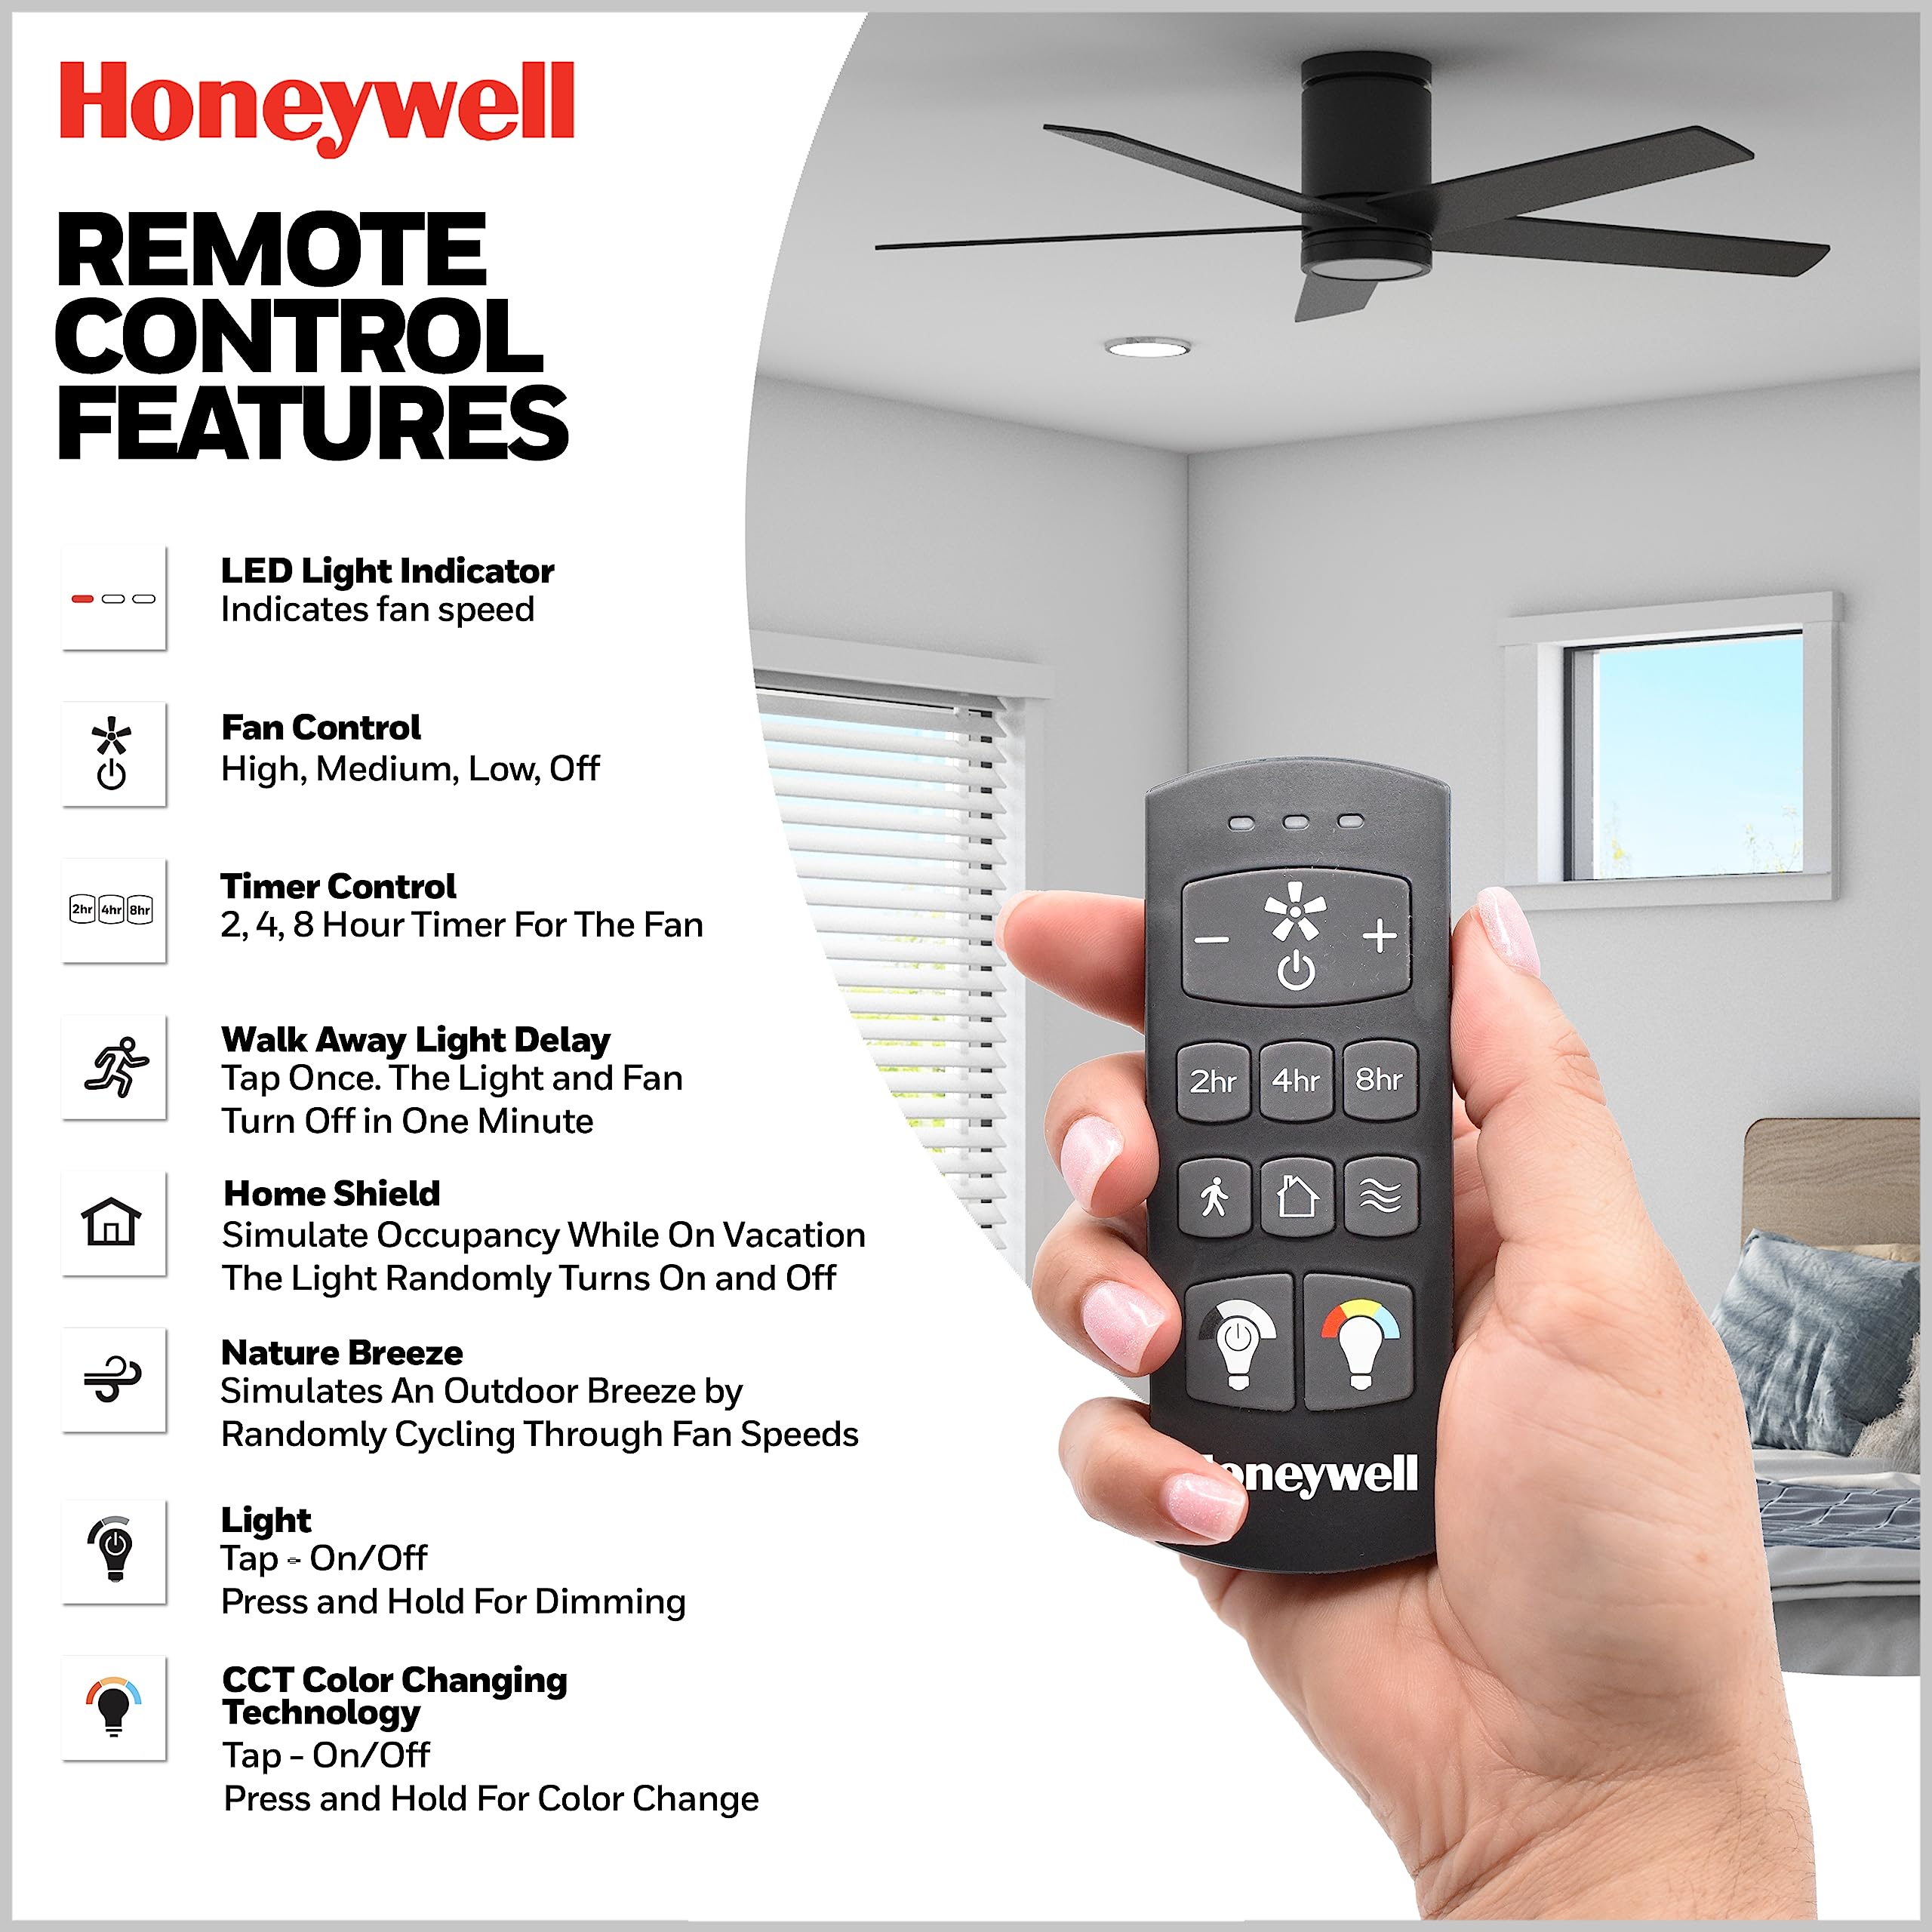 Honeywell Ceiling Fans Graceshire, 52 Inch Contemporary Ceiling Fan with Color Changing LED Light, Remote Control, Flush Mount, 5 Dual Finish Blades, Reversible Airflow - 51859-01 (Matte Black)